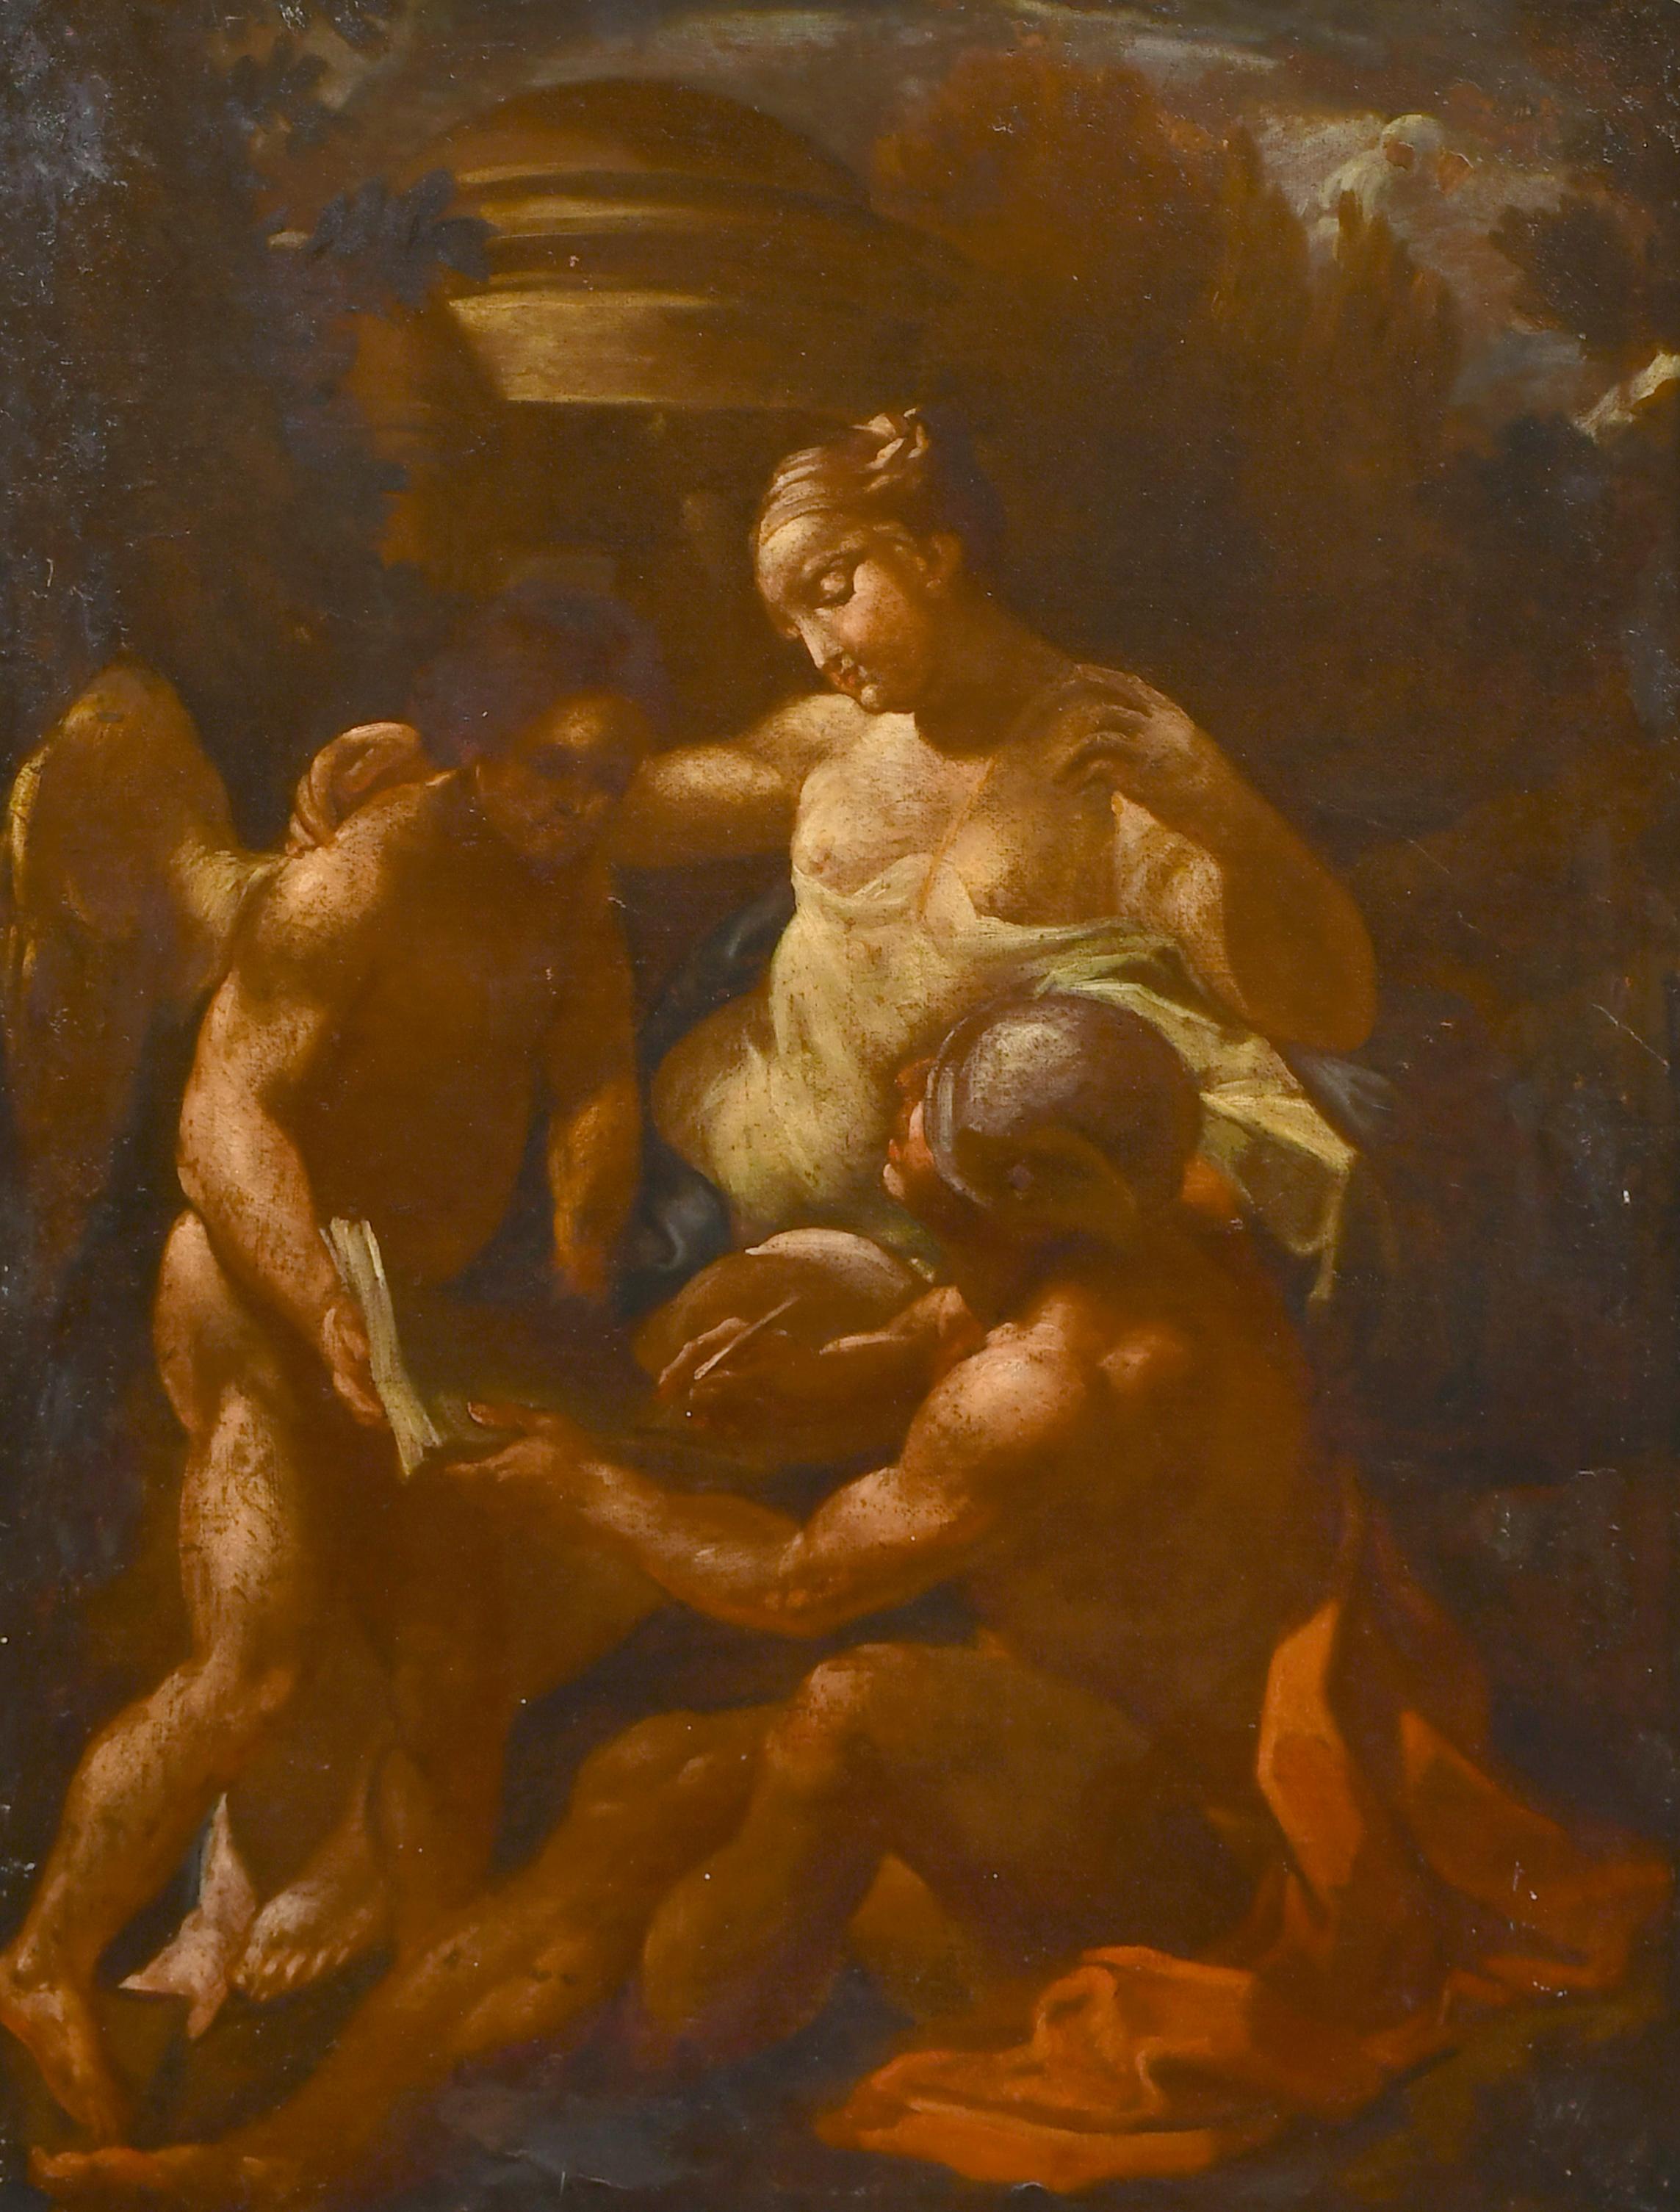 Venus with Cupid and Mars
Circle of Andreas Vaccaro (1604 - 1670) Italian
oil painting on canvas, framed
framed: 31 x 25 inches
canvas: 24 x 18.5 inches
provenance: private collection, South of France
condition: very good and sound condition for its